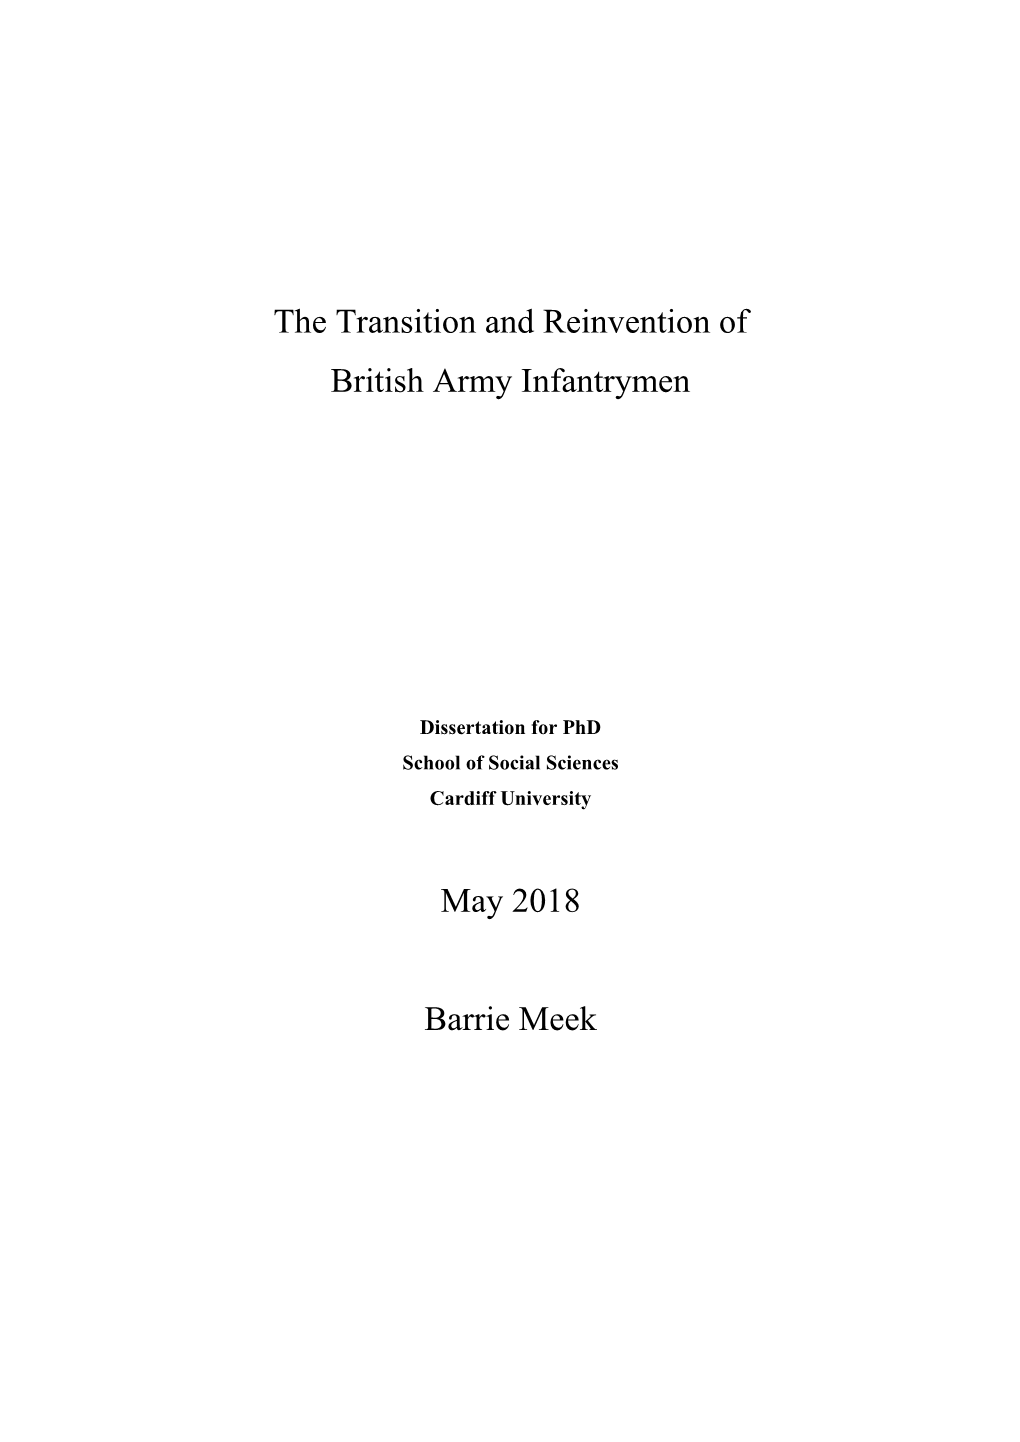 The Transition and Reinvention of British Army Infantrymen May 2018